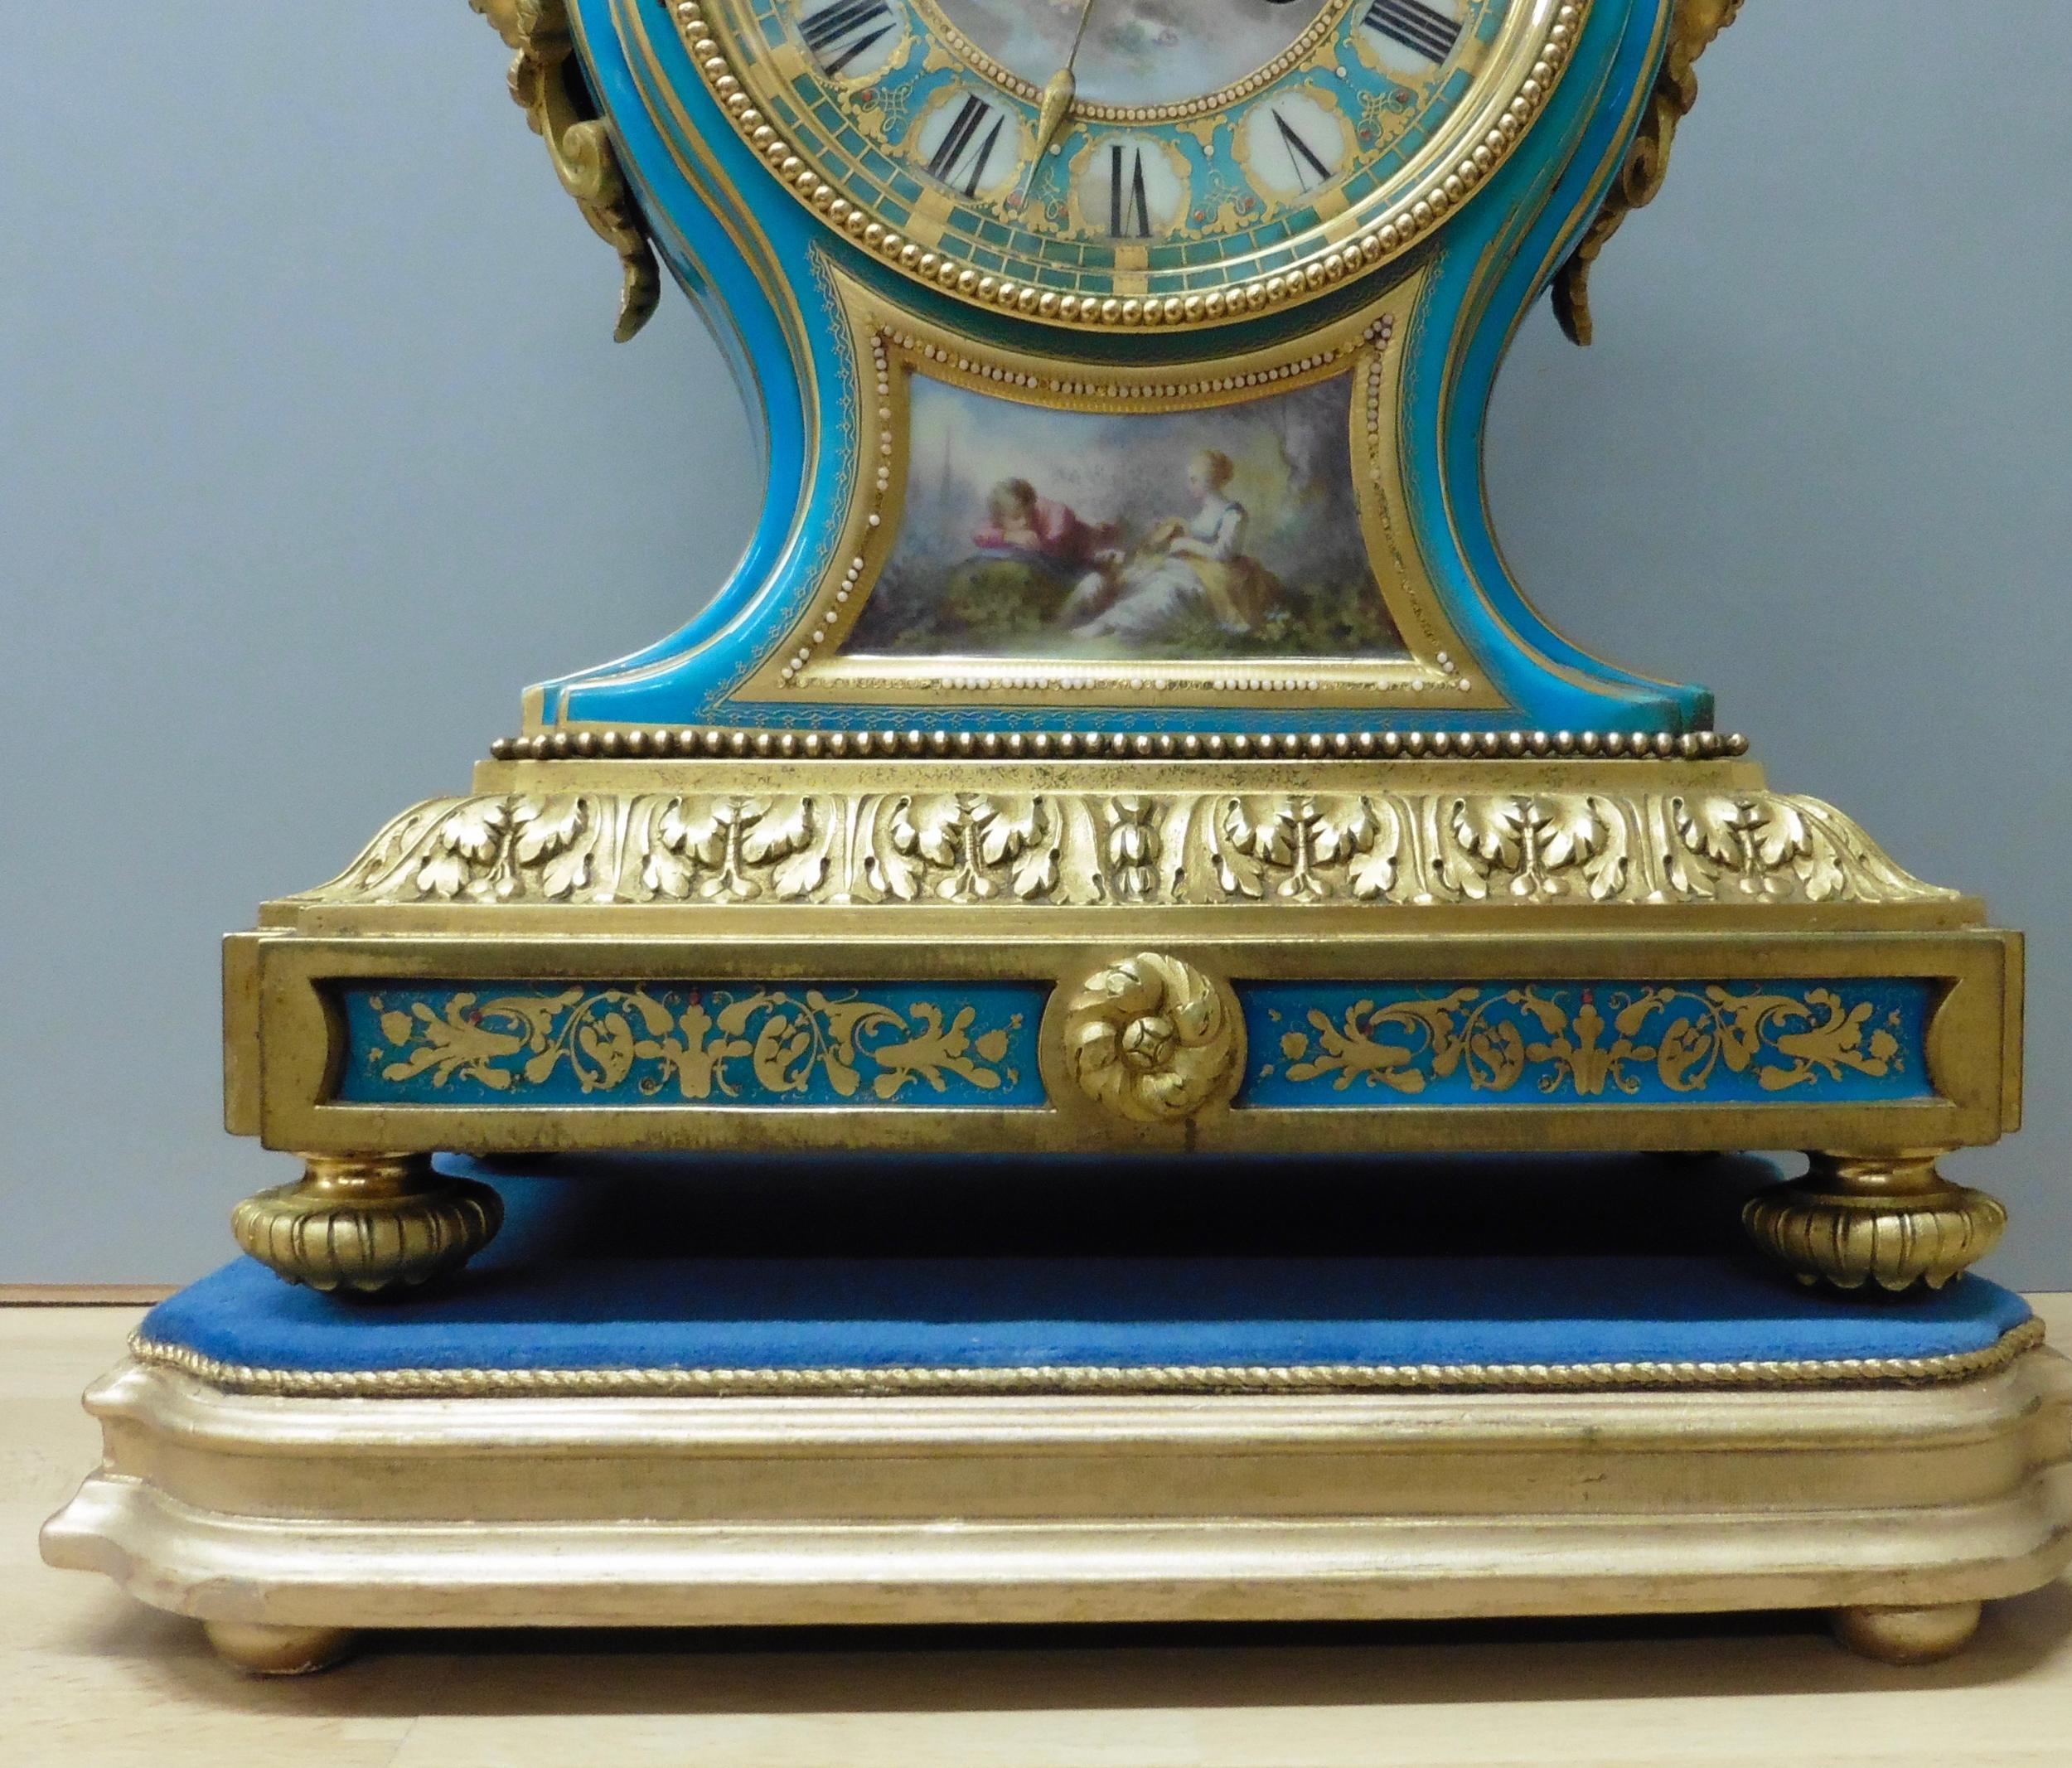 French Porcelain and ormolu mantel clock with gilded toupe feet supporting a raised plinth with an inset blue decorated panel below gilded acanthus moulding.

Turquoise porcelain waisted case with hand painted panel featuring a courting couple